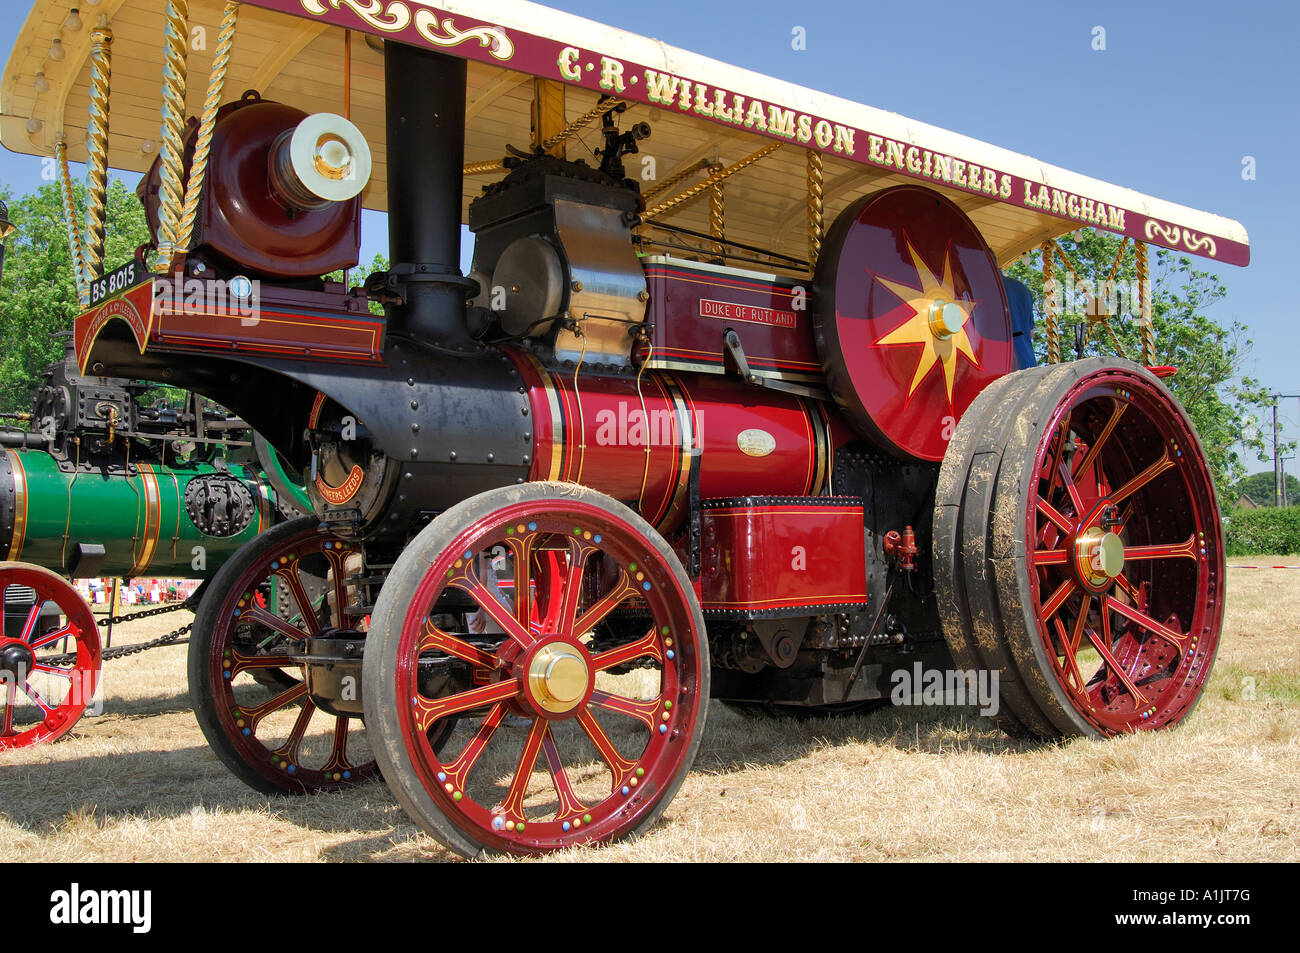 Traction Engine From G.R. Willaimson Engineers Langham on display at village vintage car rally Stock Photo